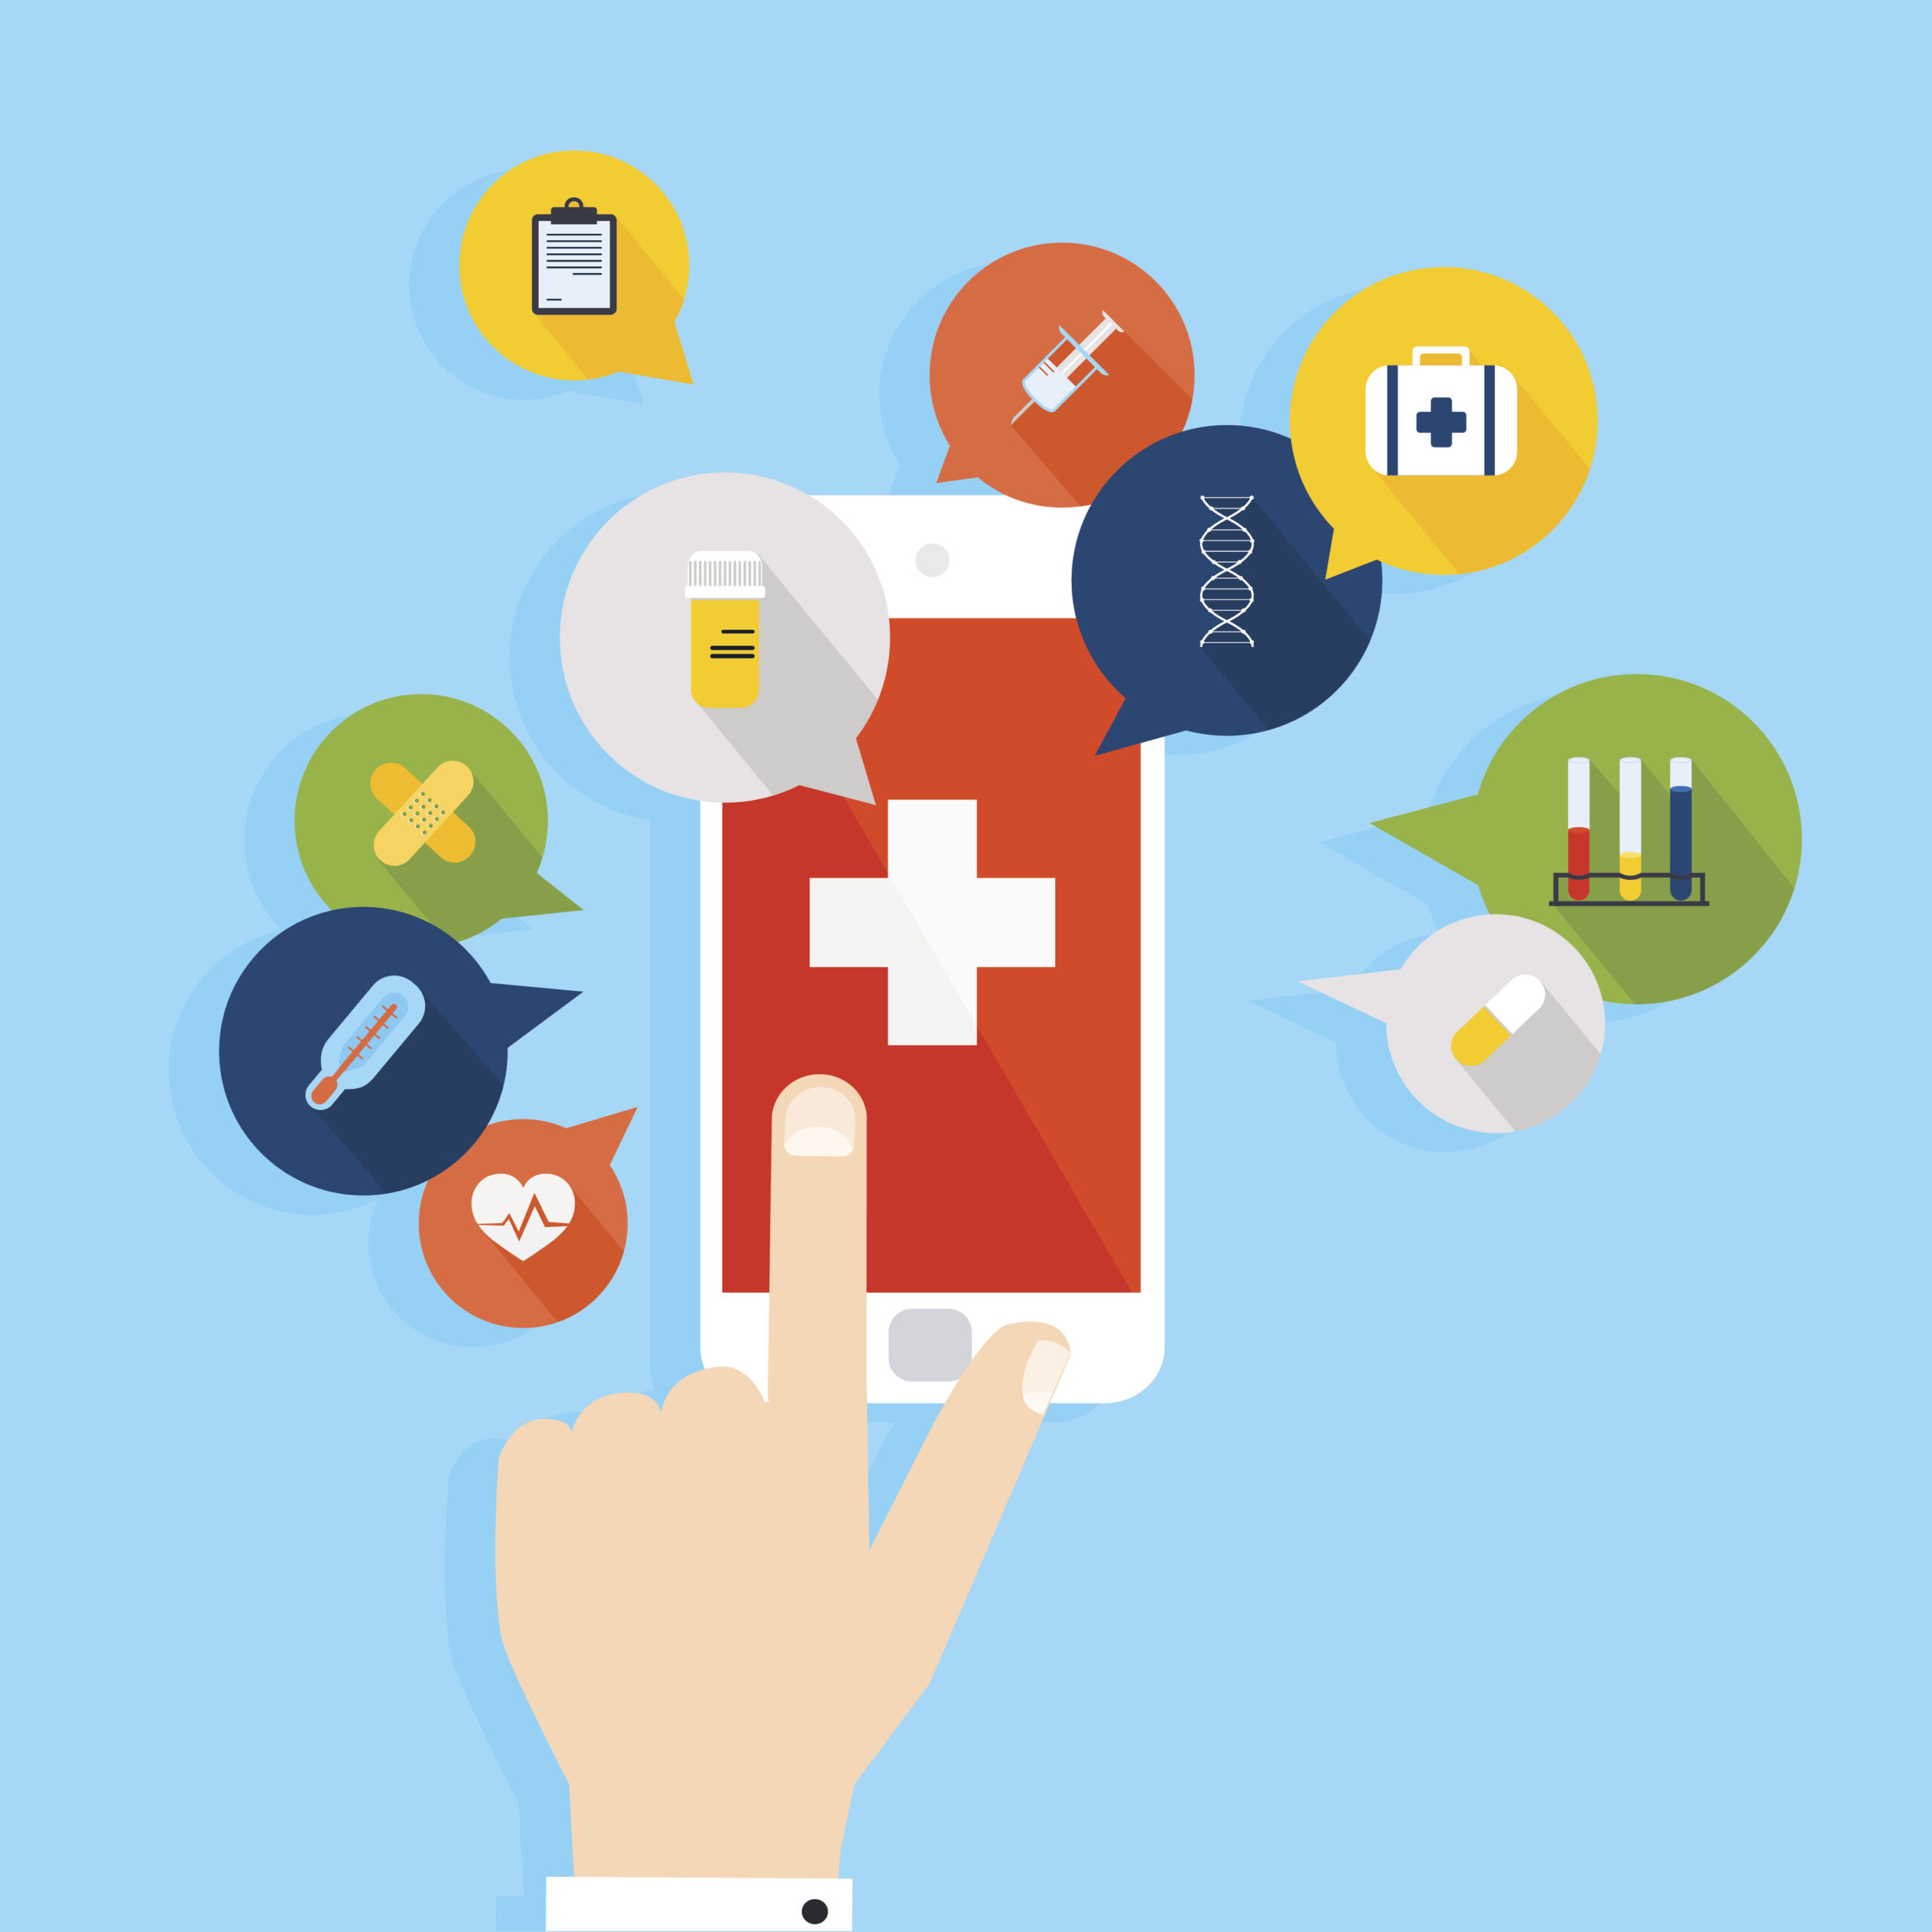 mHealth Medical App Development Can Help Your Business Stay Organized